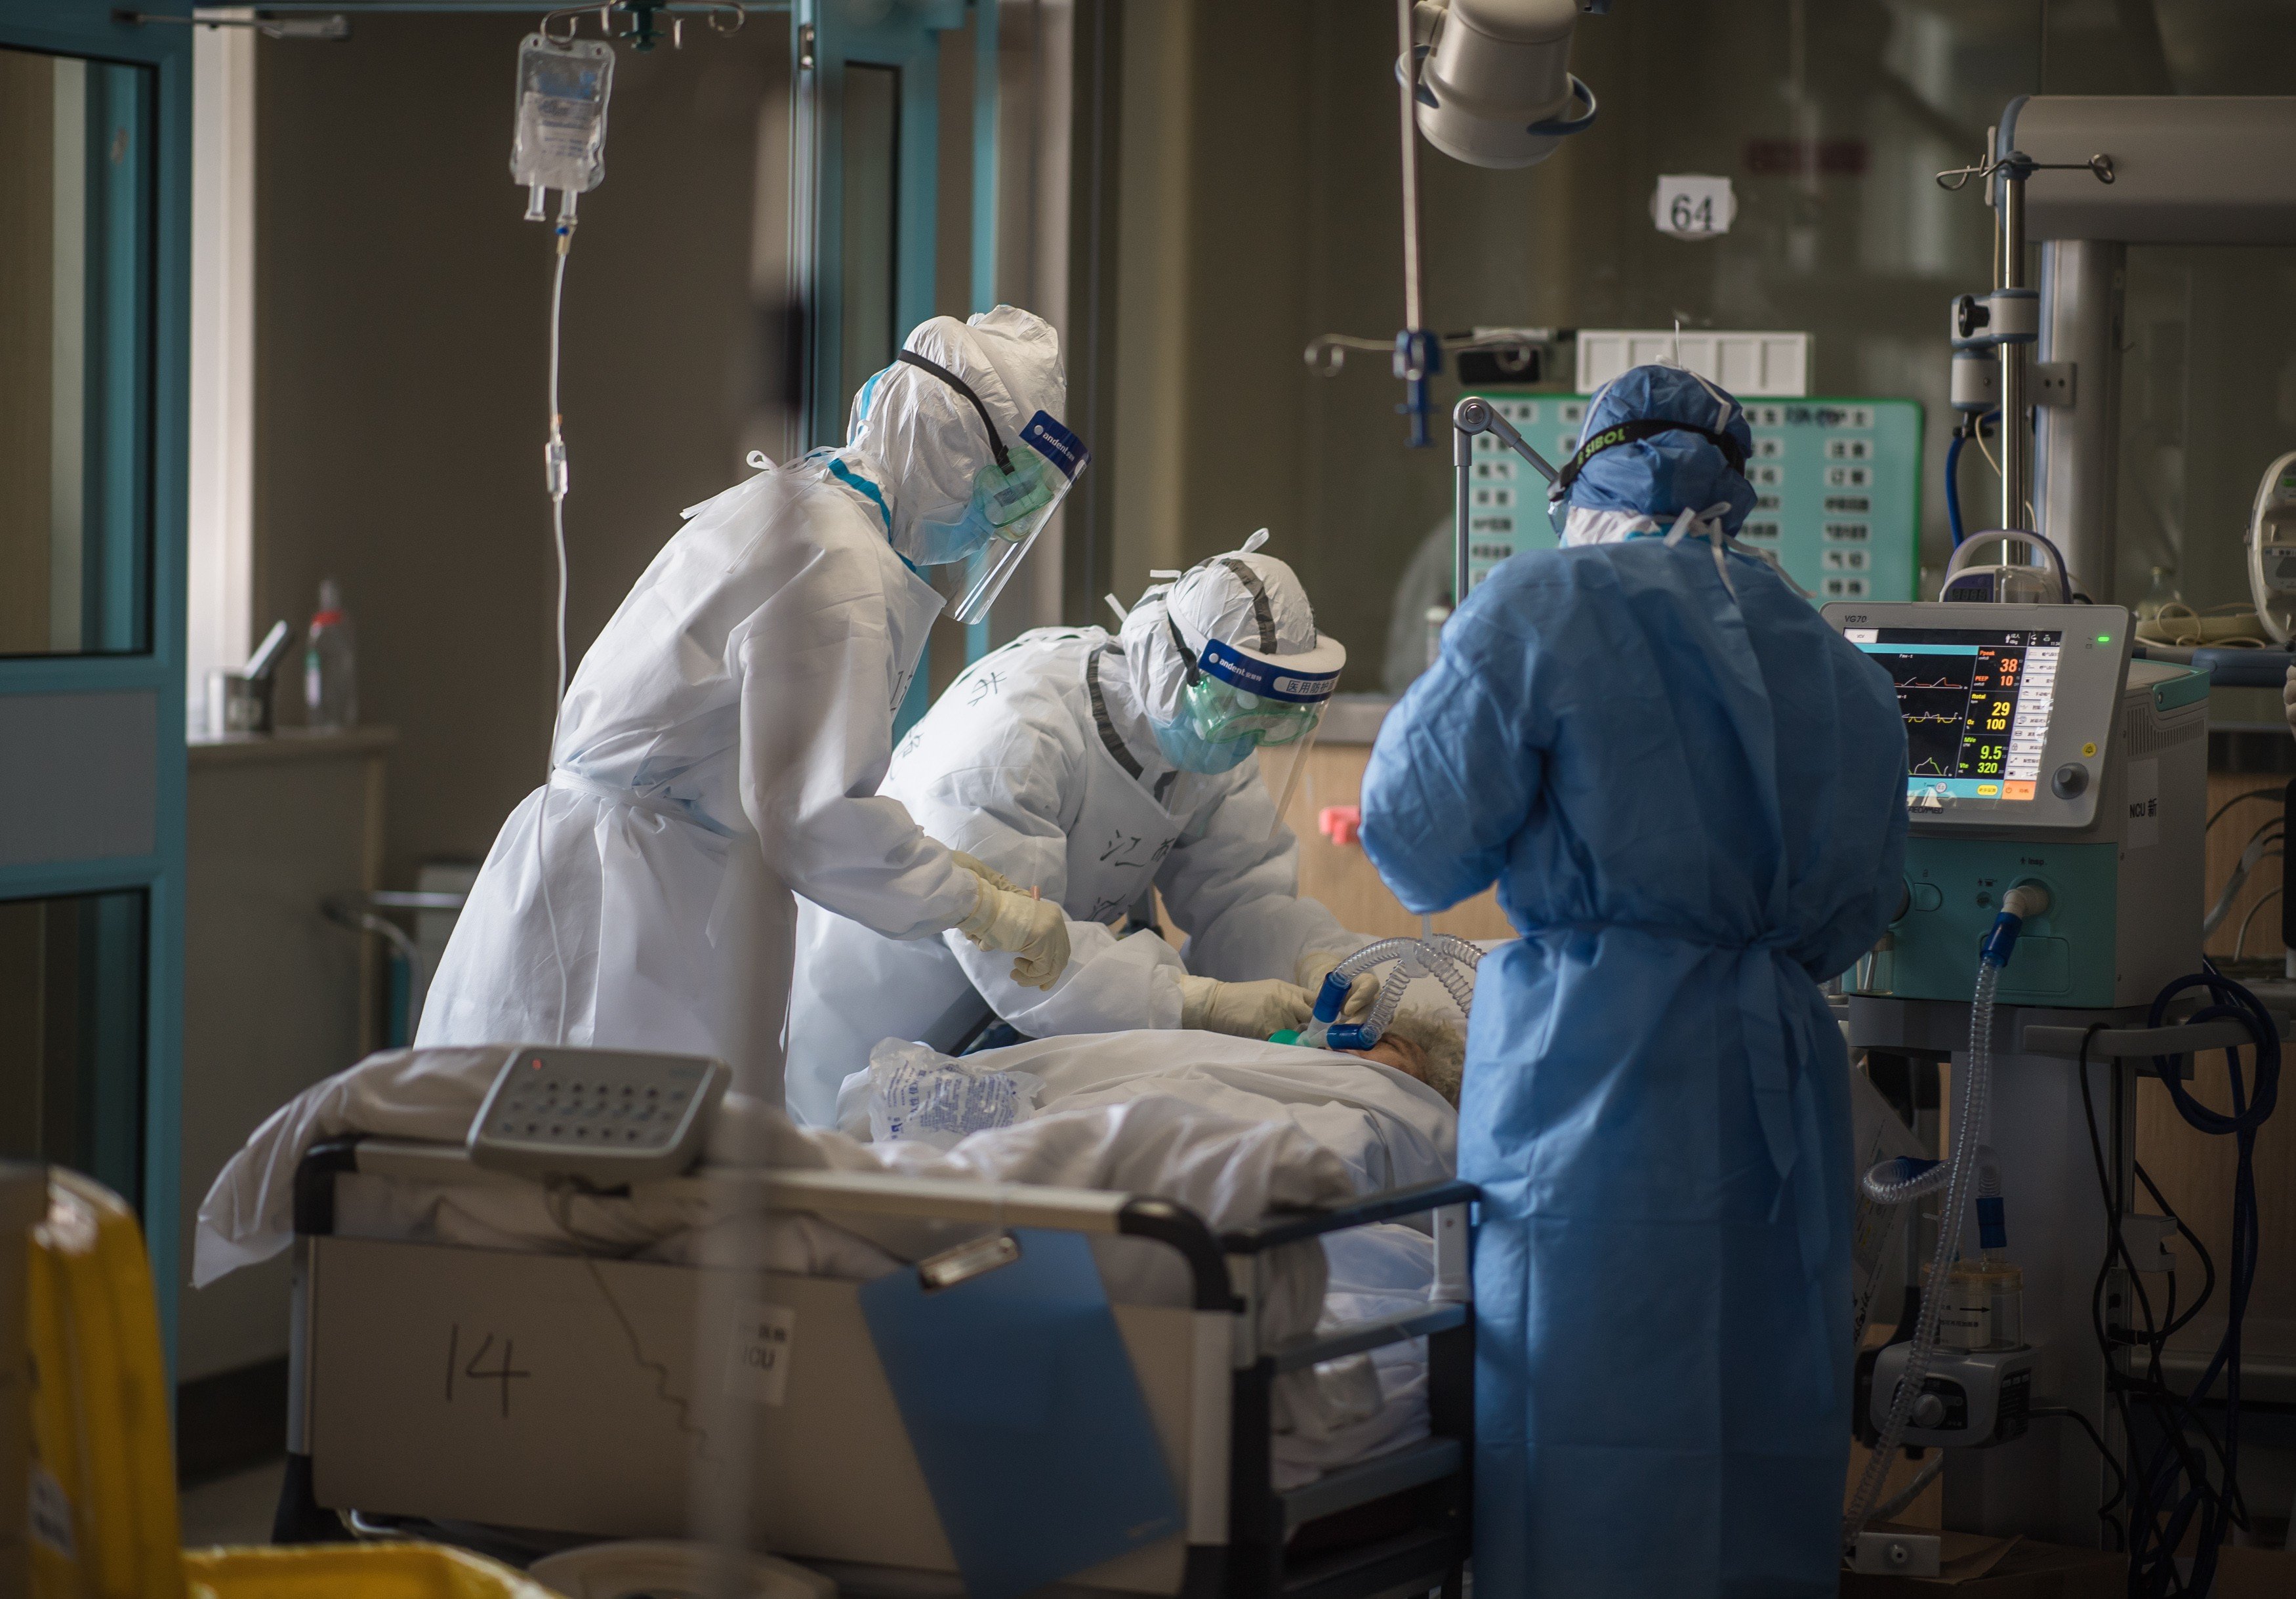 Medical staff at work in an ICU ward at a hospital in Wuhan, provincial capital of Hubei province where the new coronavirus emerged. Photo: Xinhua